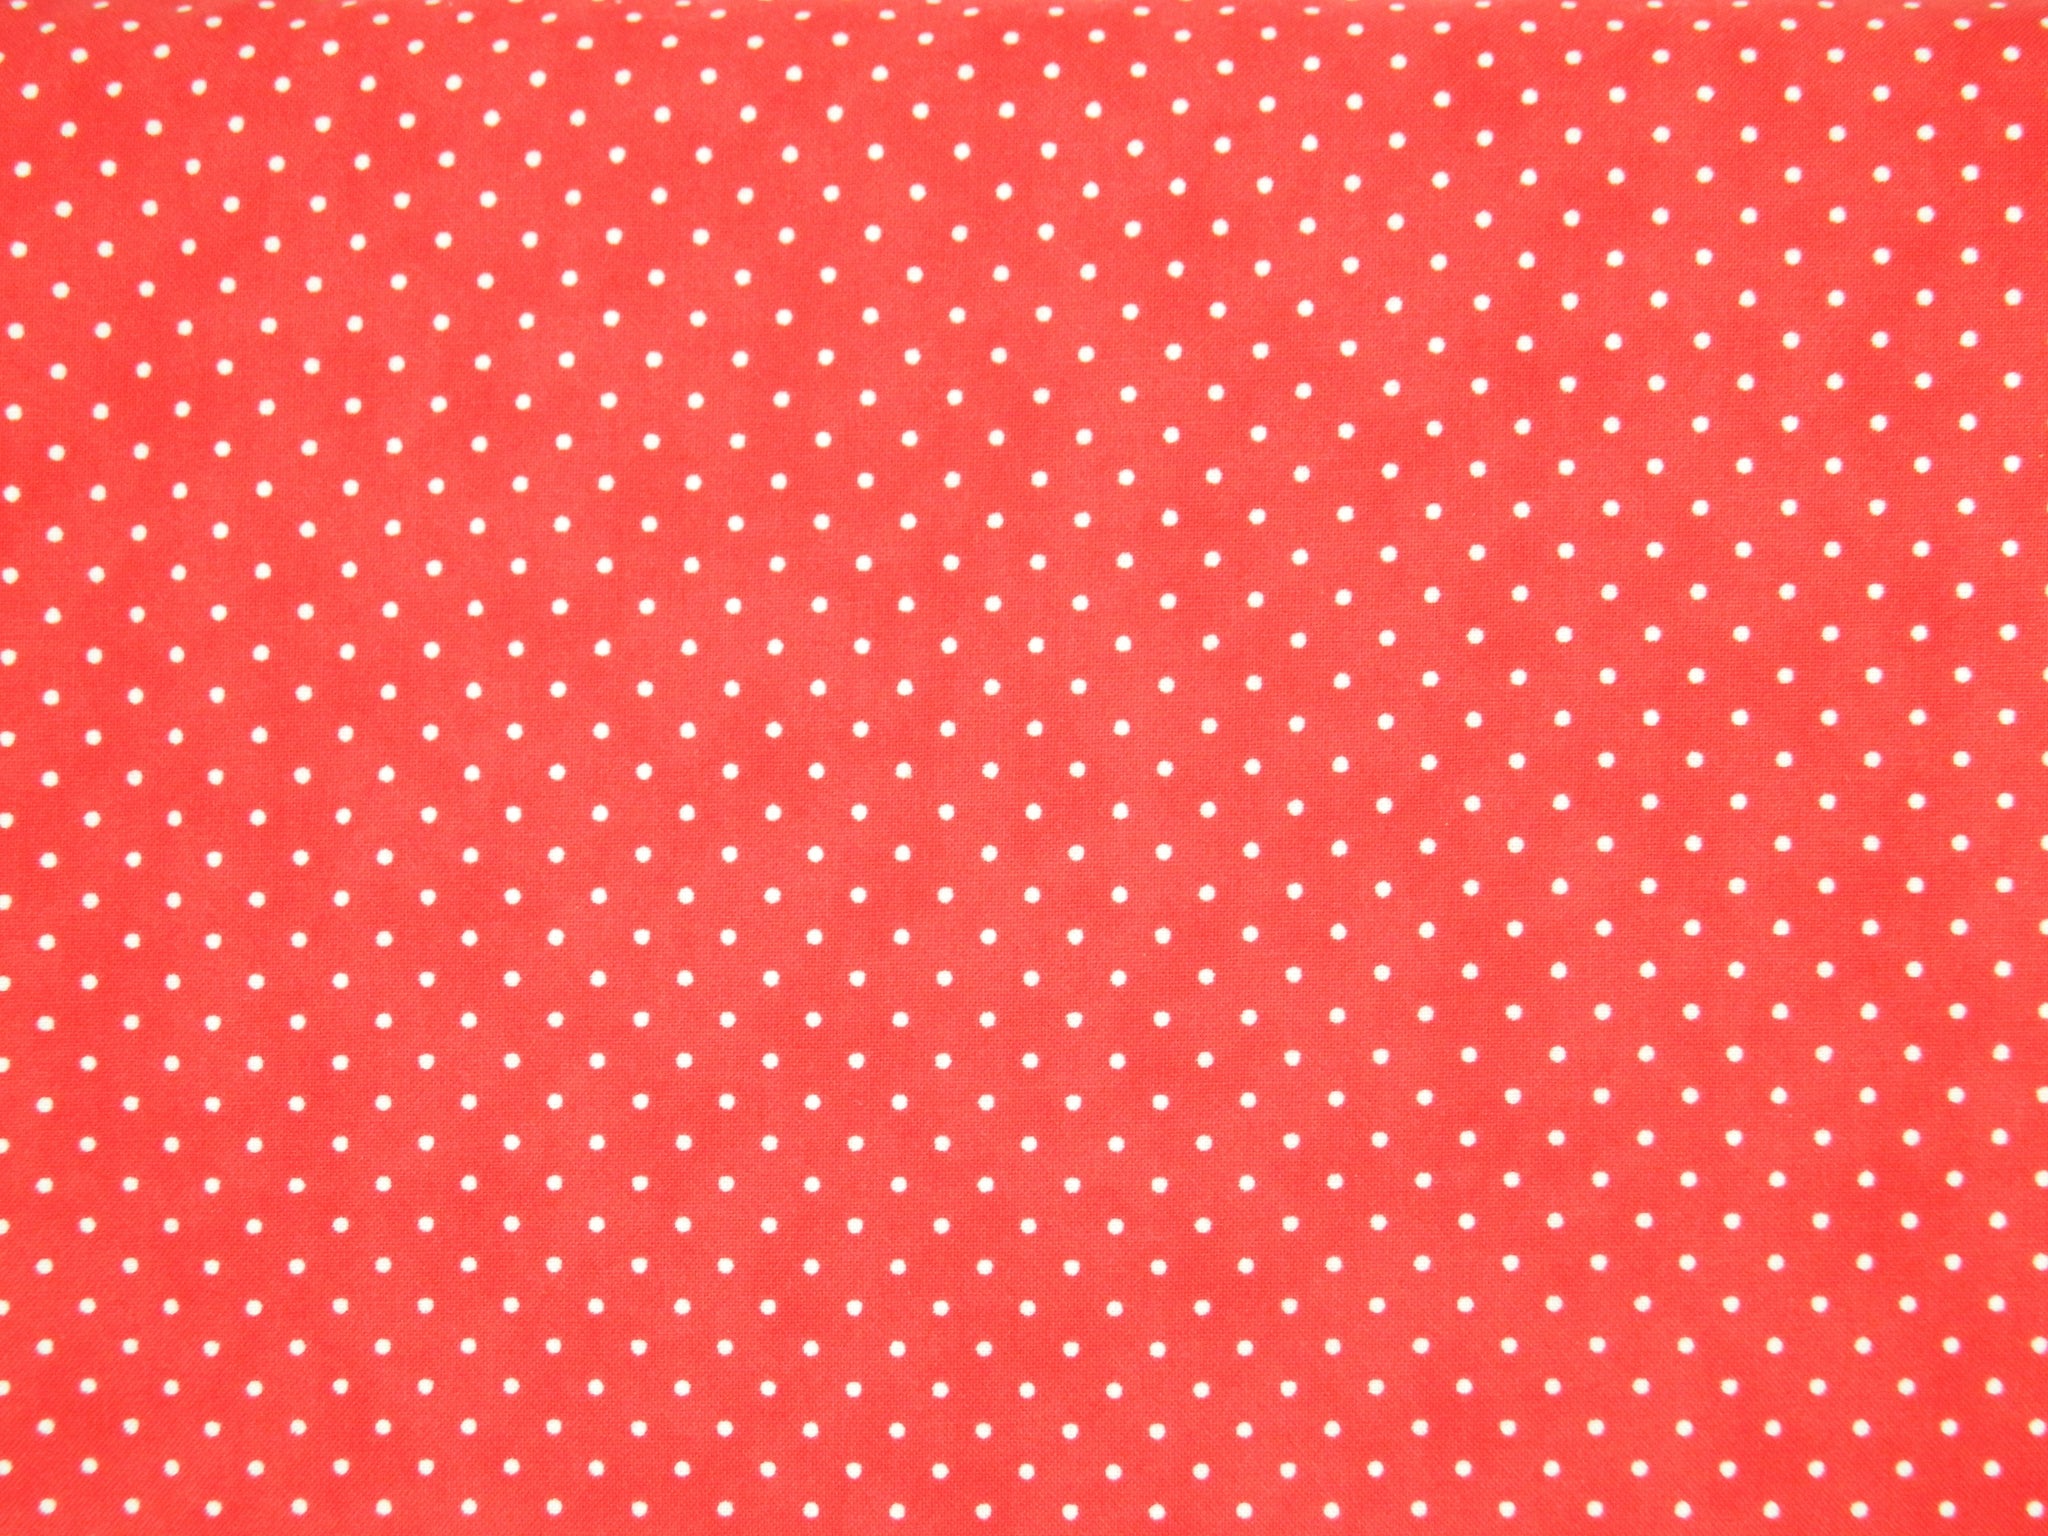 Red with white spot      Essential Dots M8654-38